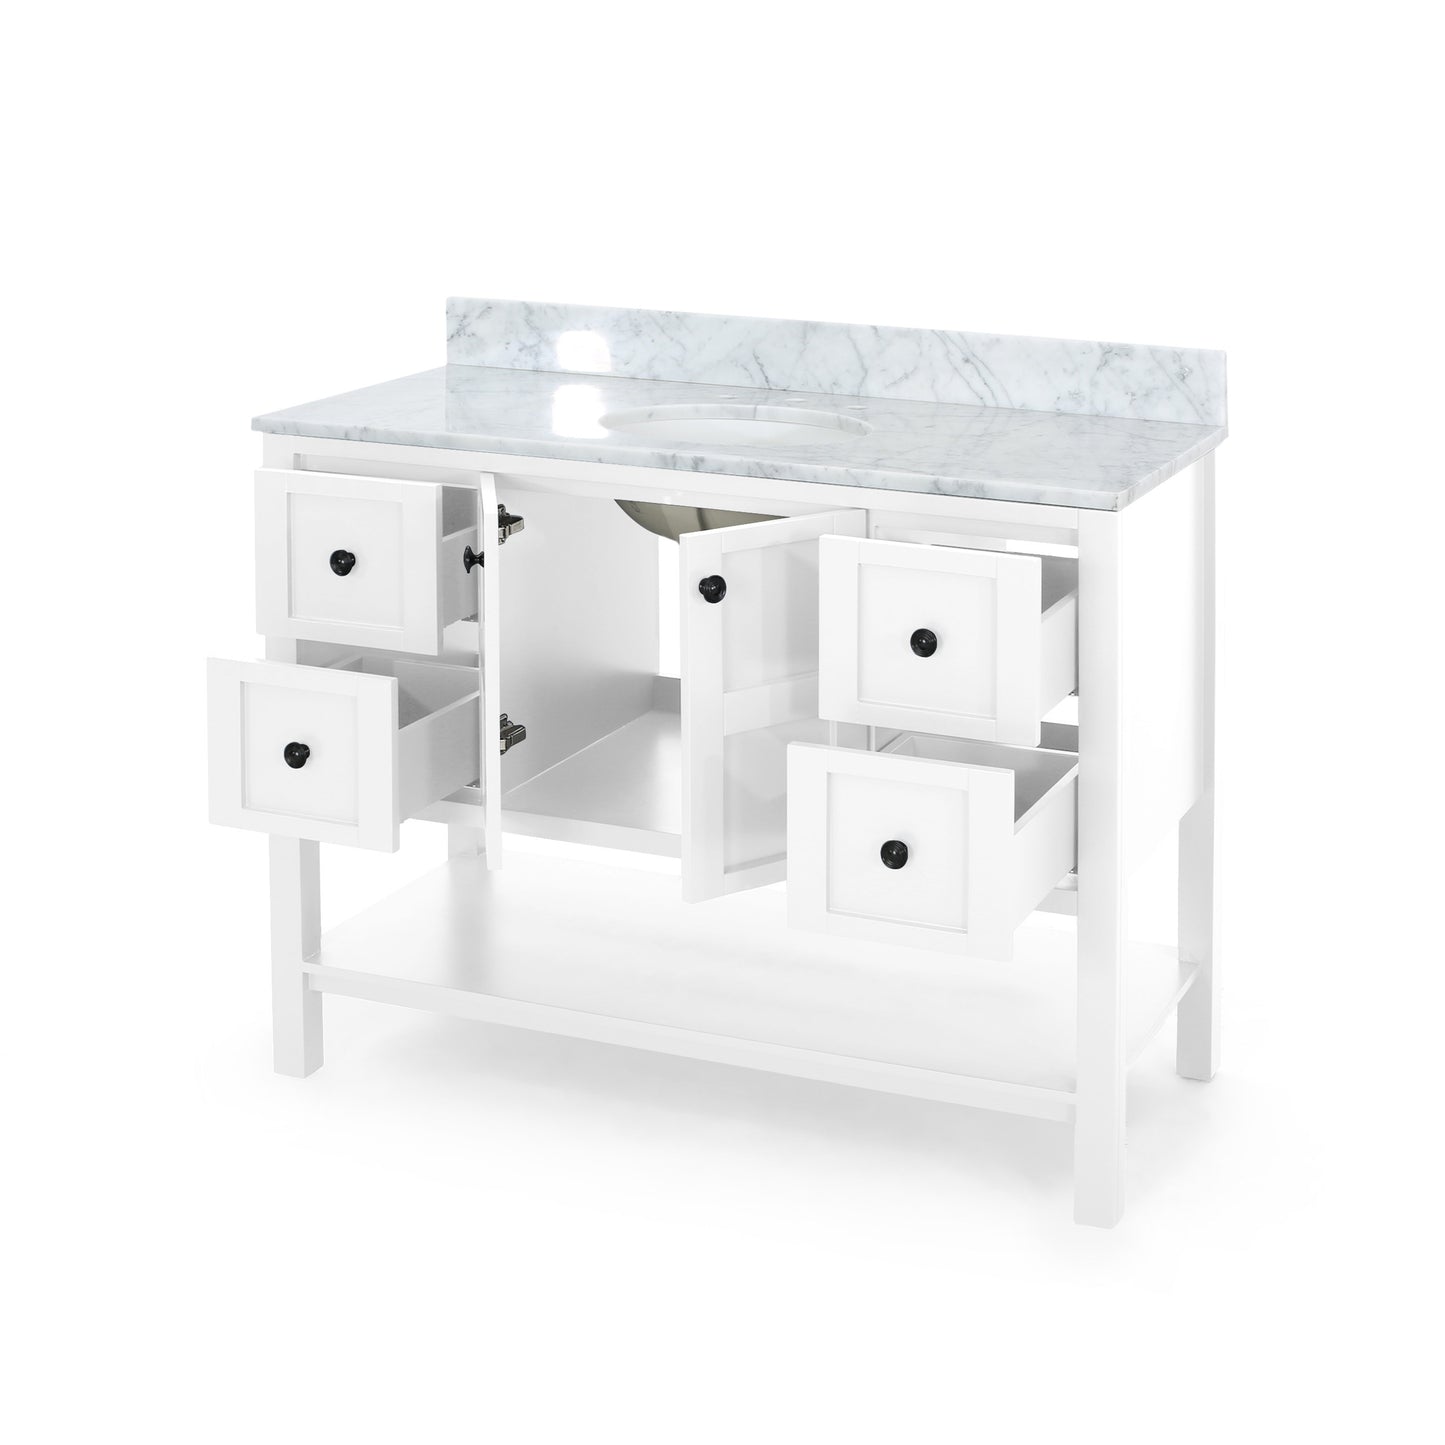 Jamison Contemporary 48" Wood Single Sink Bathroom Vanity with Marble Counter Top with Carrara White Marble